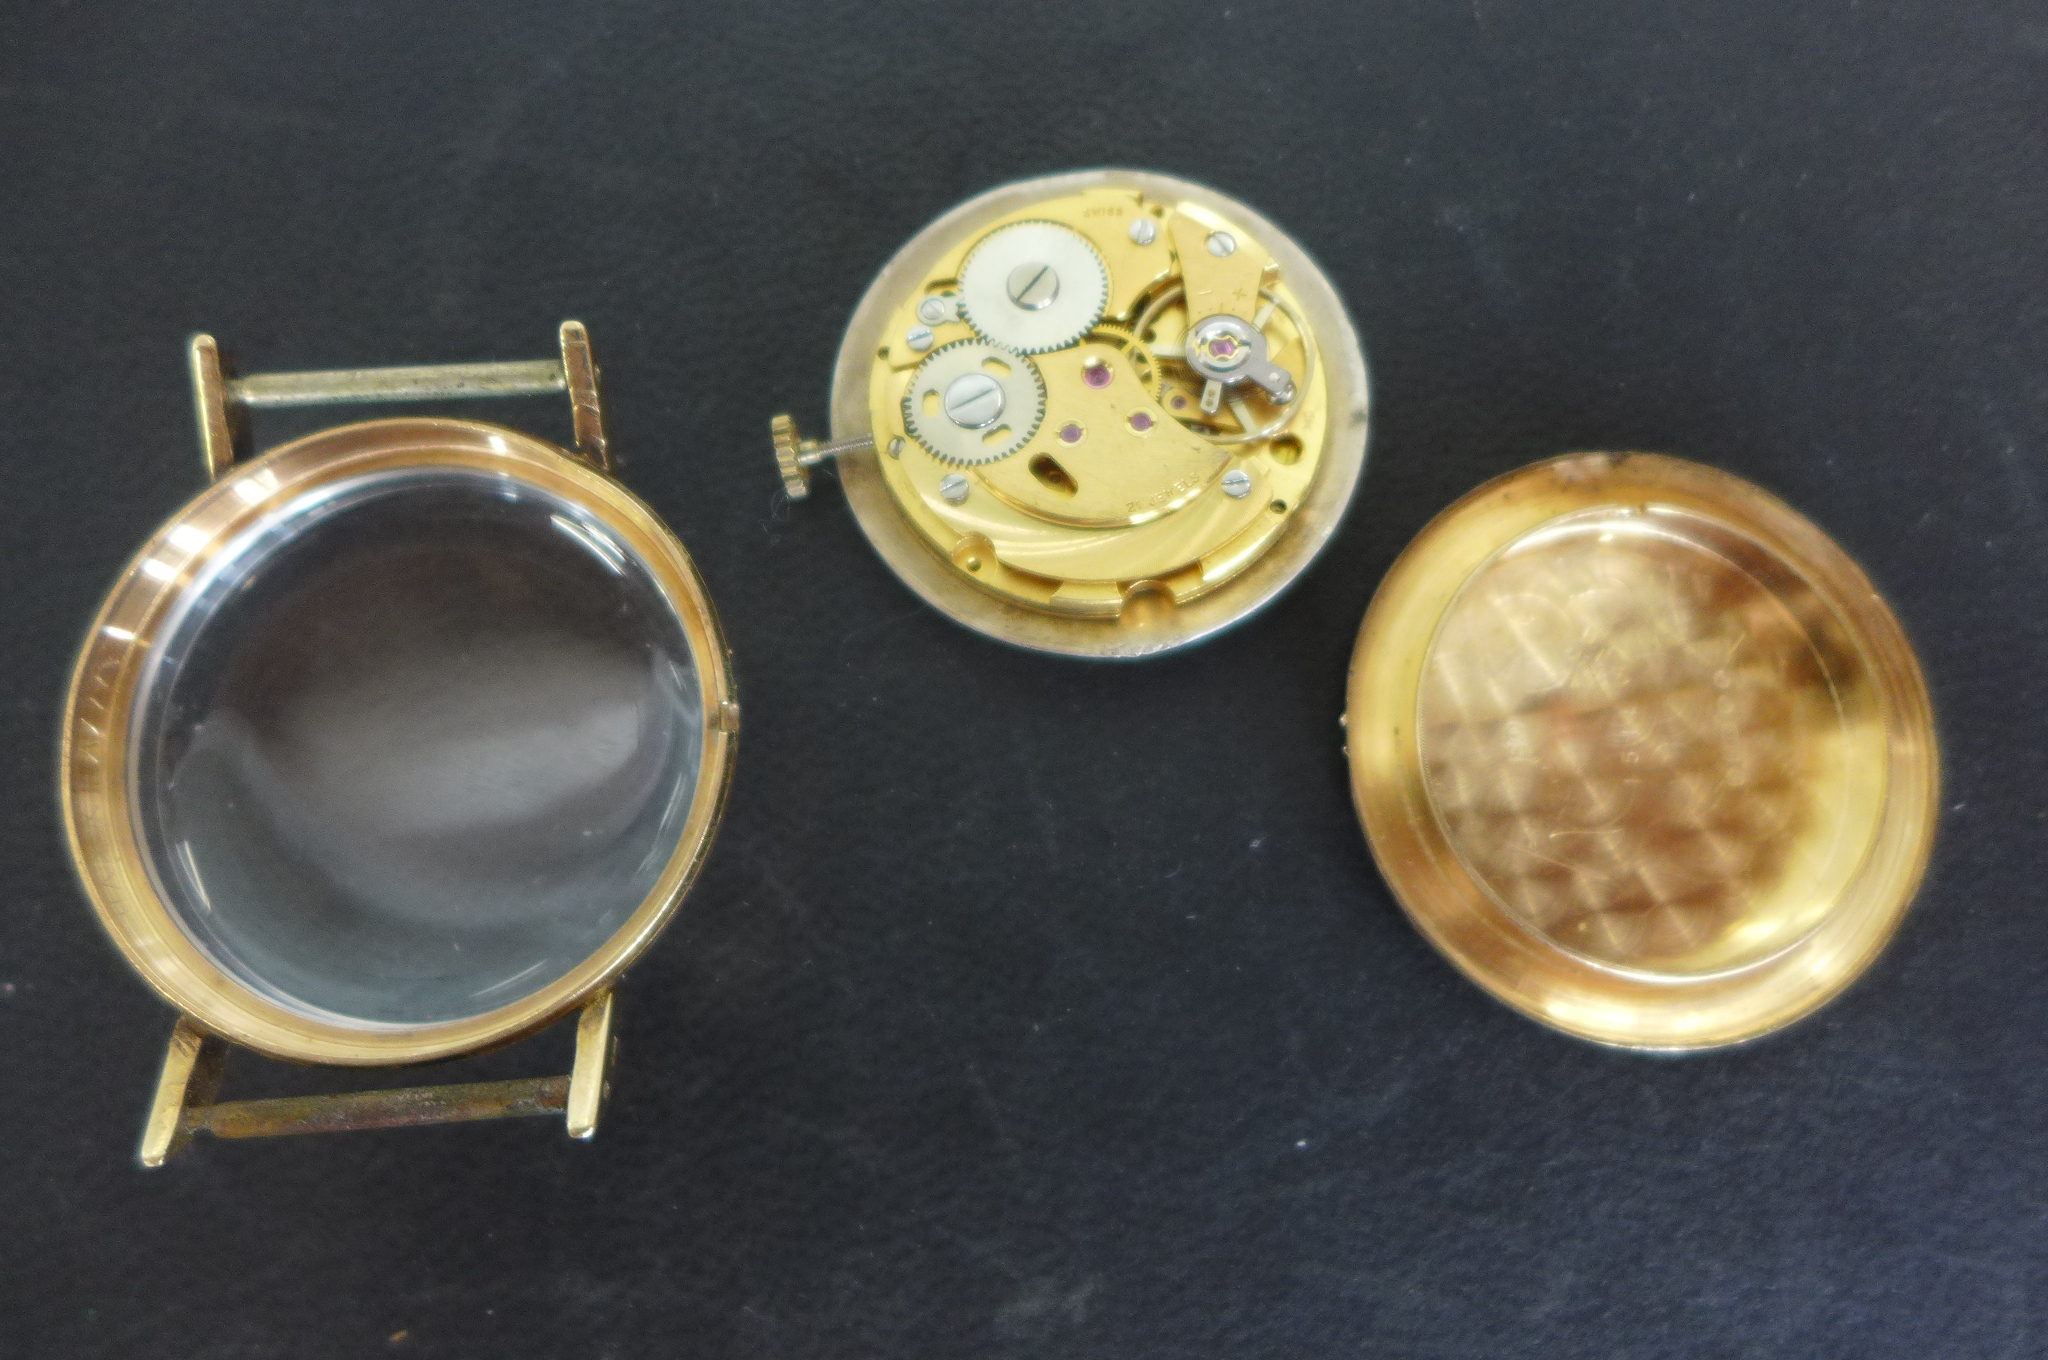 A gents 9ct gold Rotary wristwatch, case fully hallmarked, gold weight approx 10 gram, dial silvered - Image 3 of 3